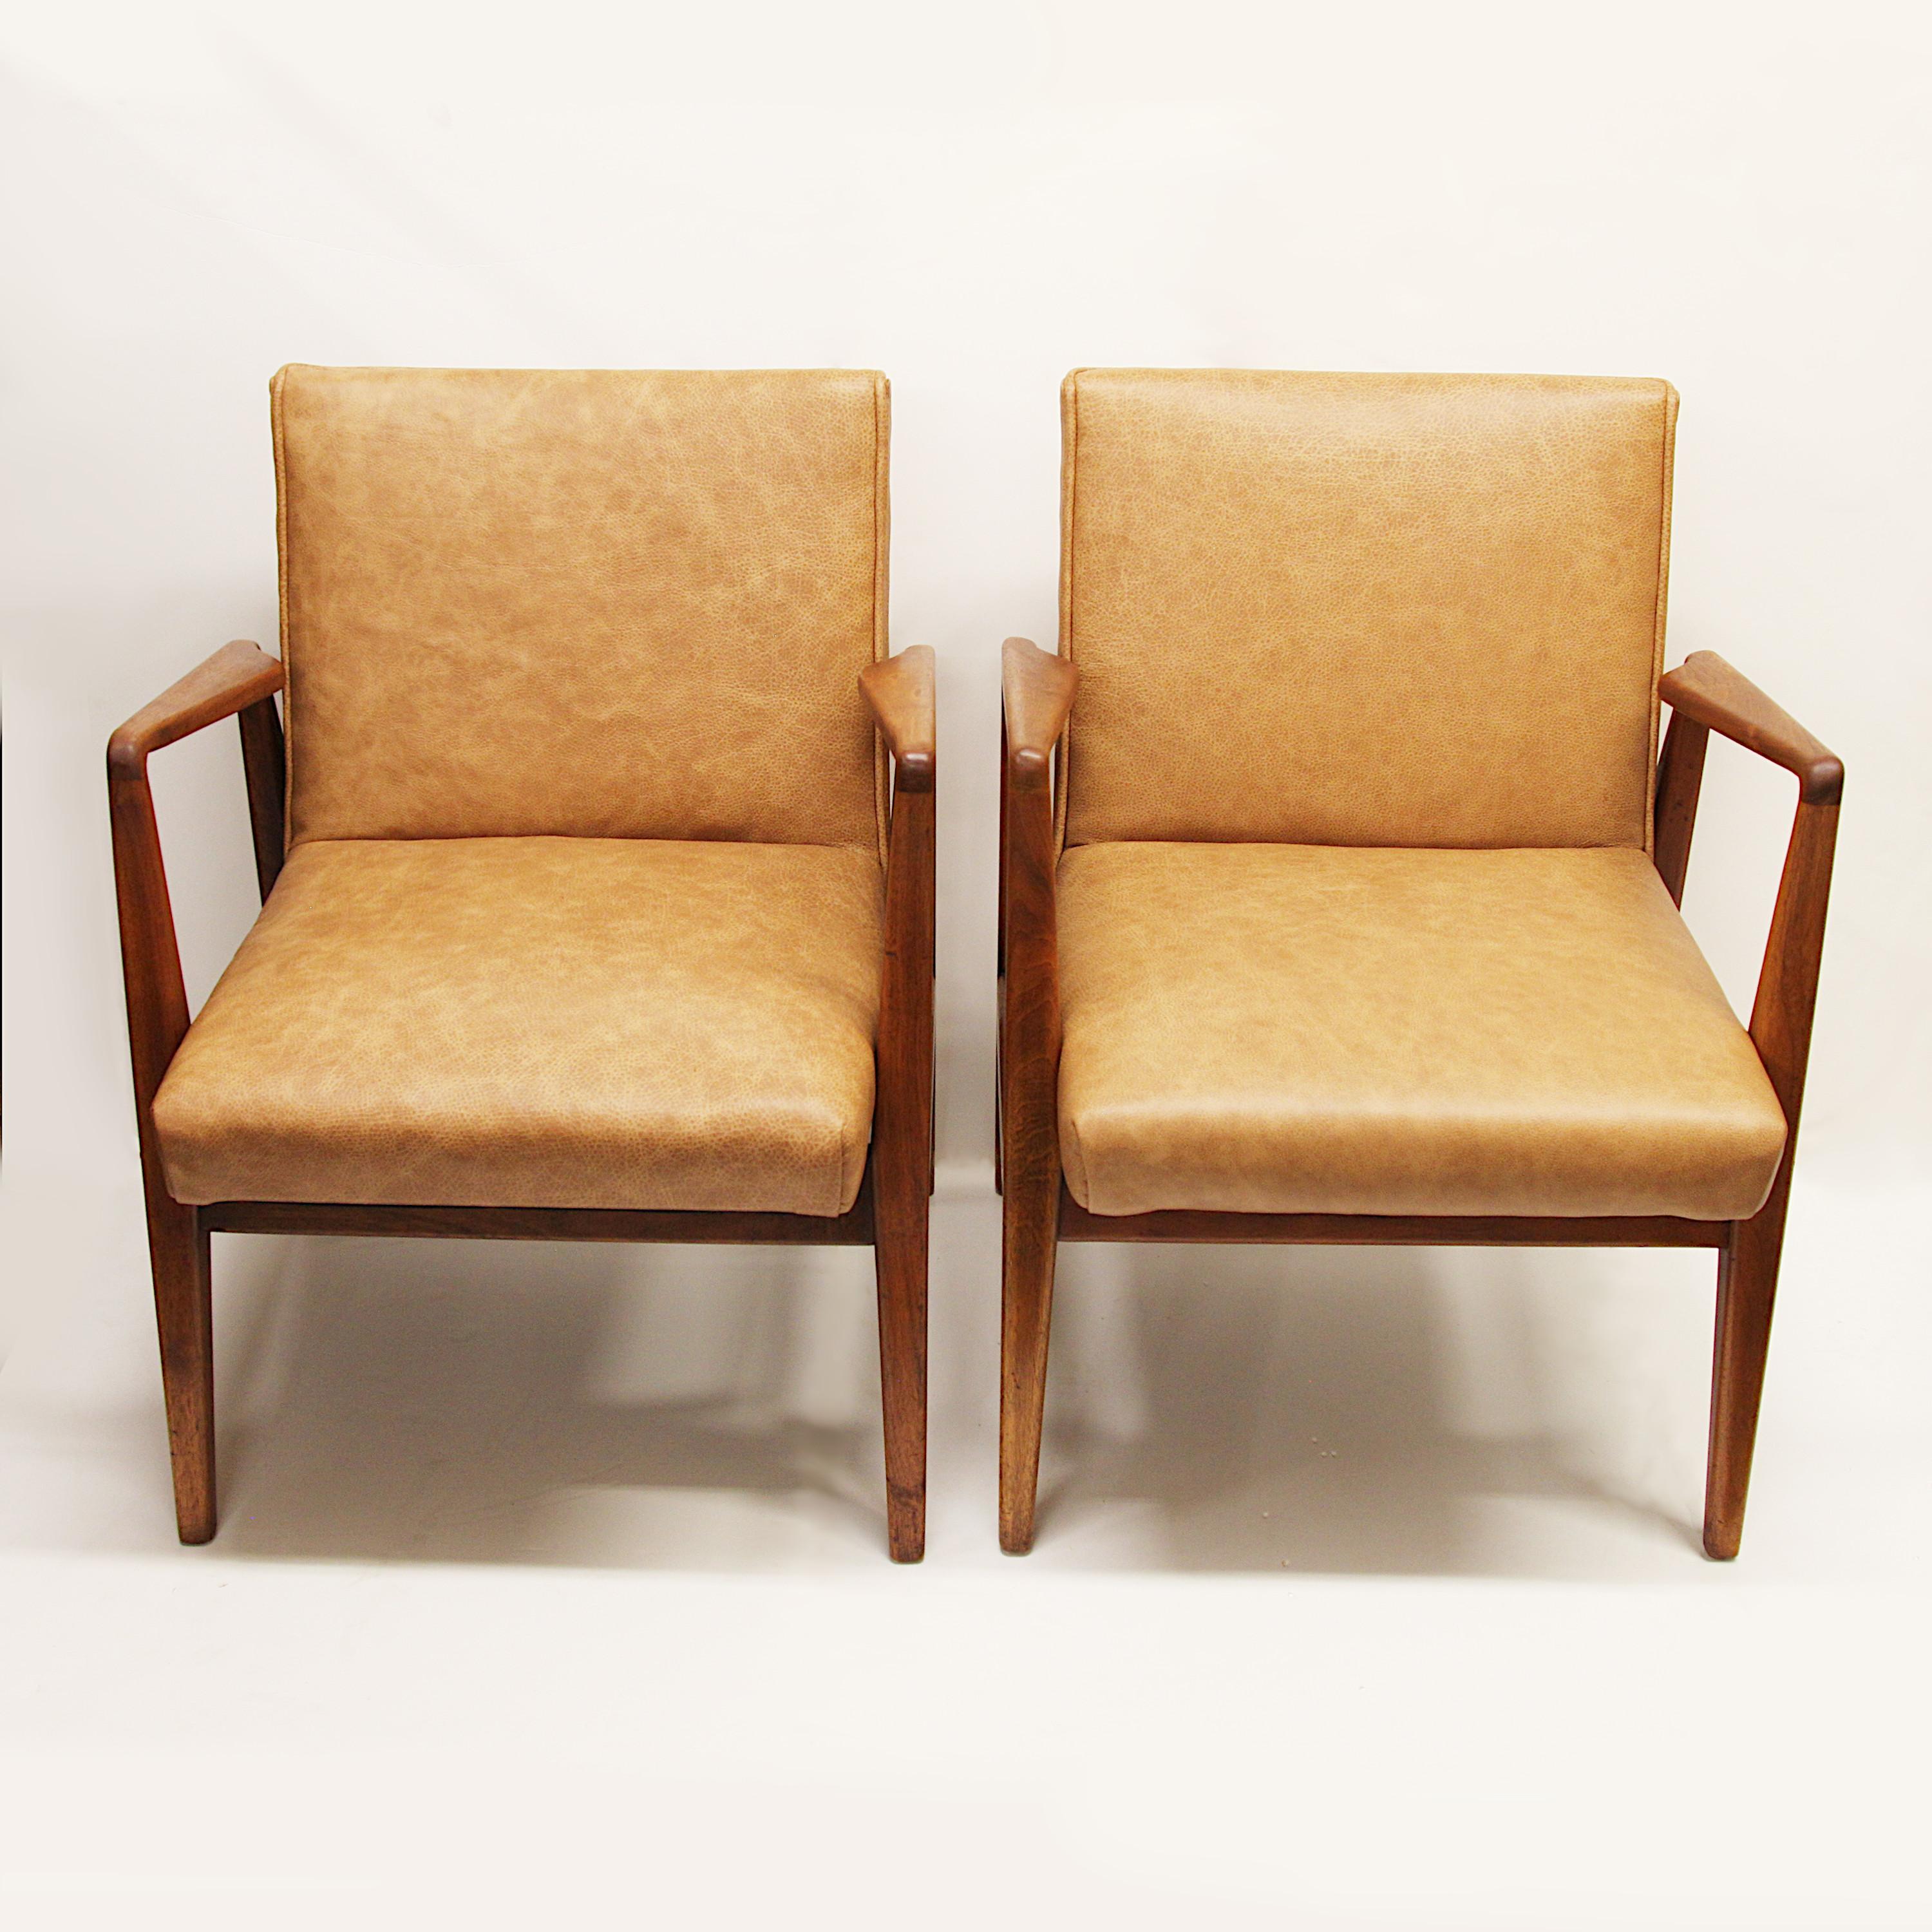 Mid-20th Century Pair of Mid-Century Modern Model C-120 Leather & Walnut Armchairs by Jens Risom